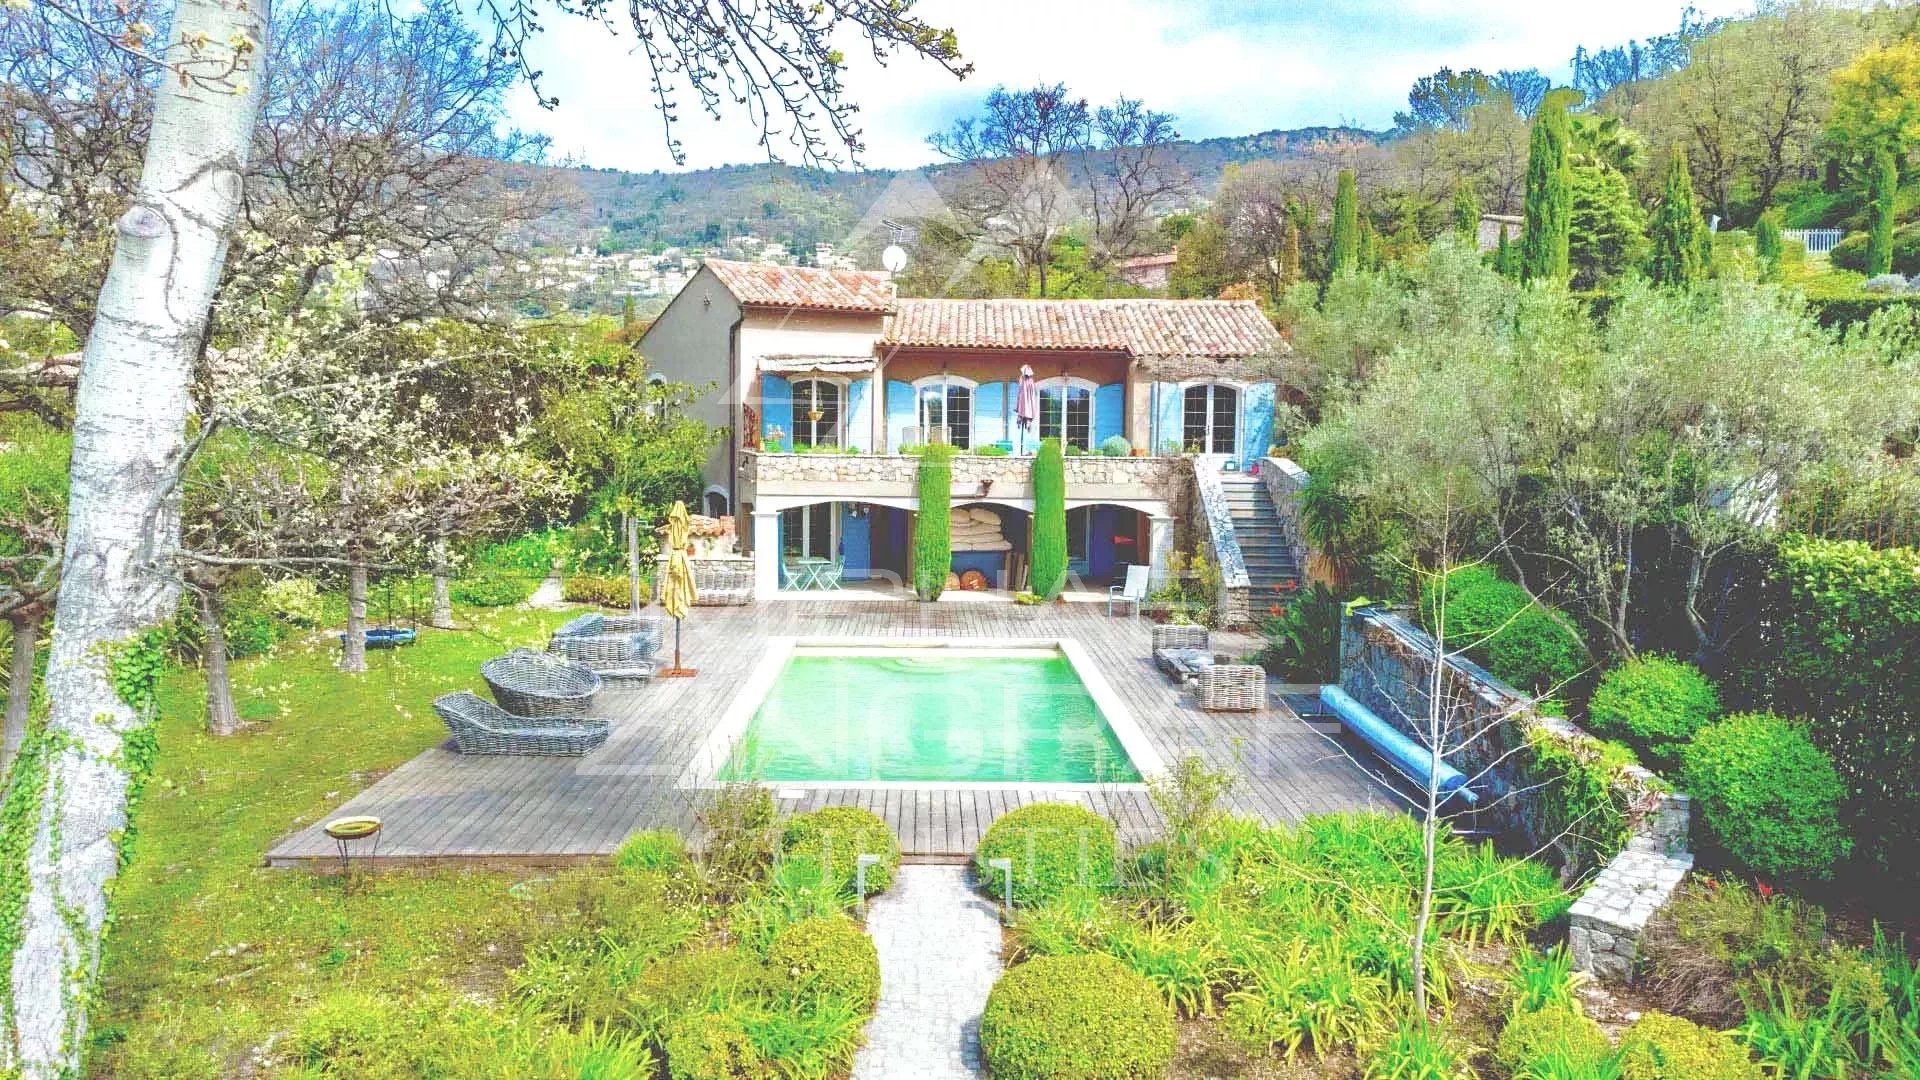 Cannes backcountry - Amazing family property